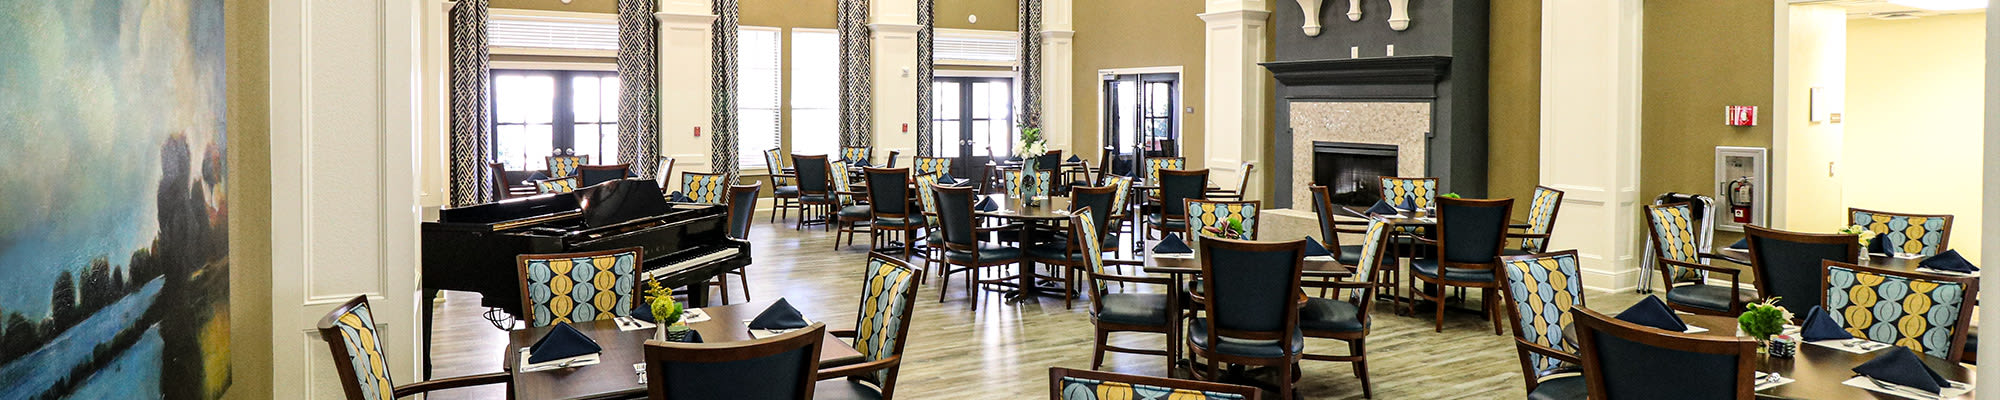 Dining at Landing at Watermere Frisco Assisted Living in Frisco, Texas